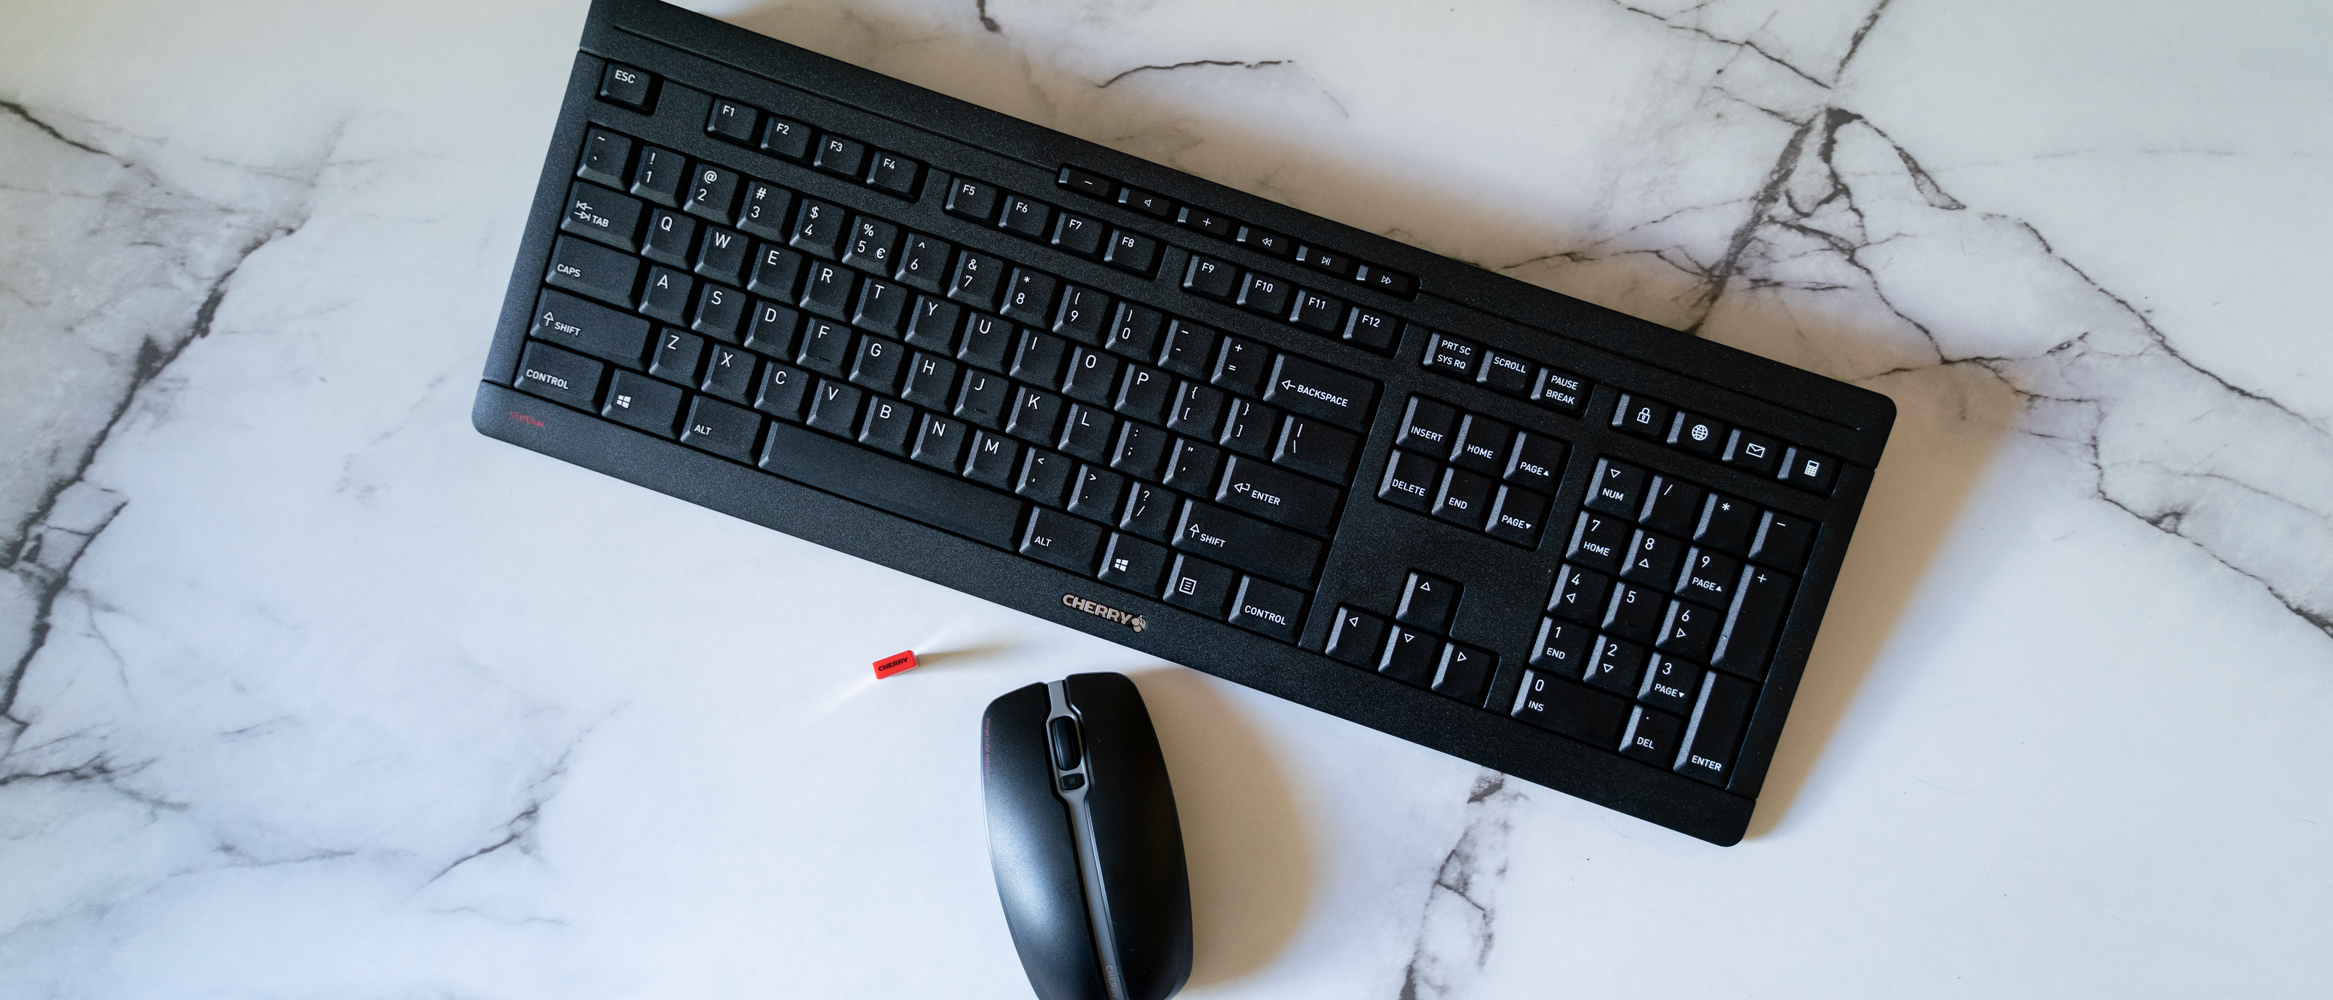 keyboard and Stream combo Cherry mouse Desktop TechRadar review |